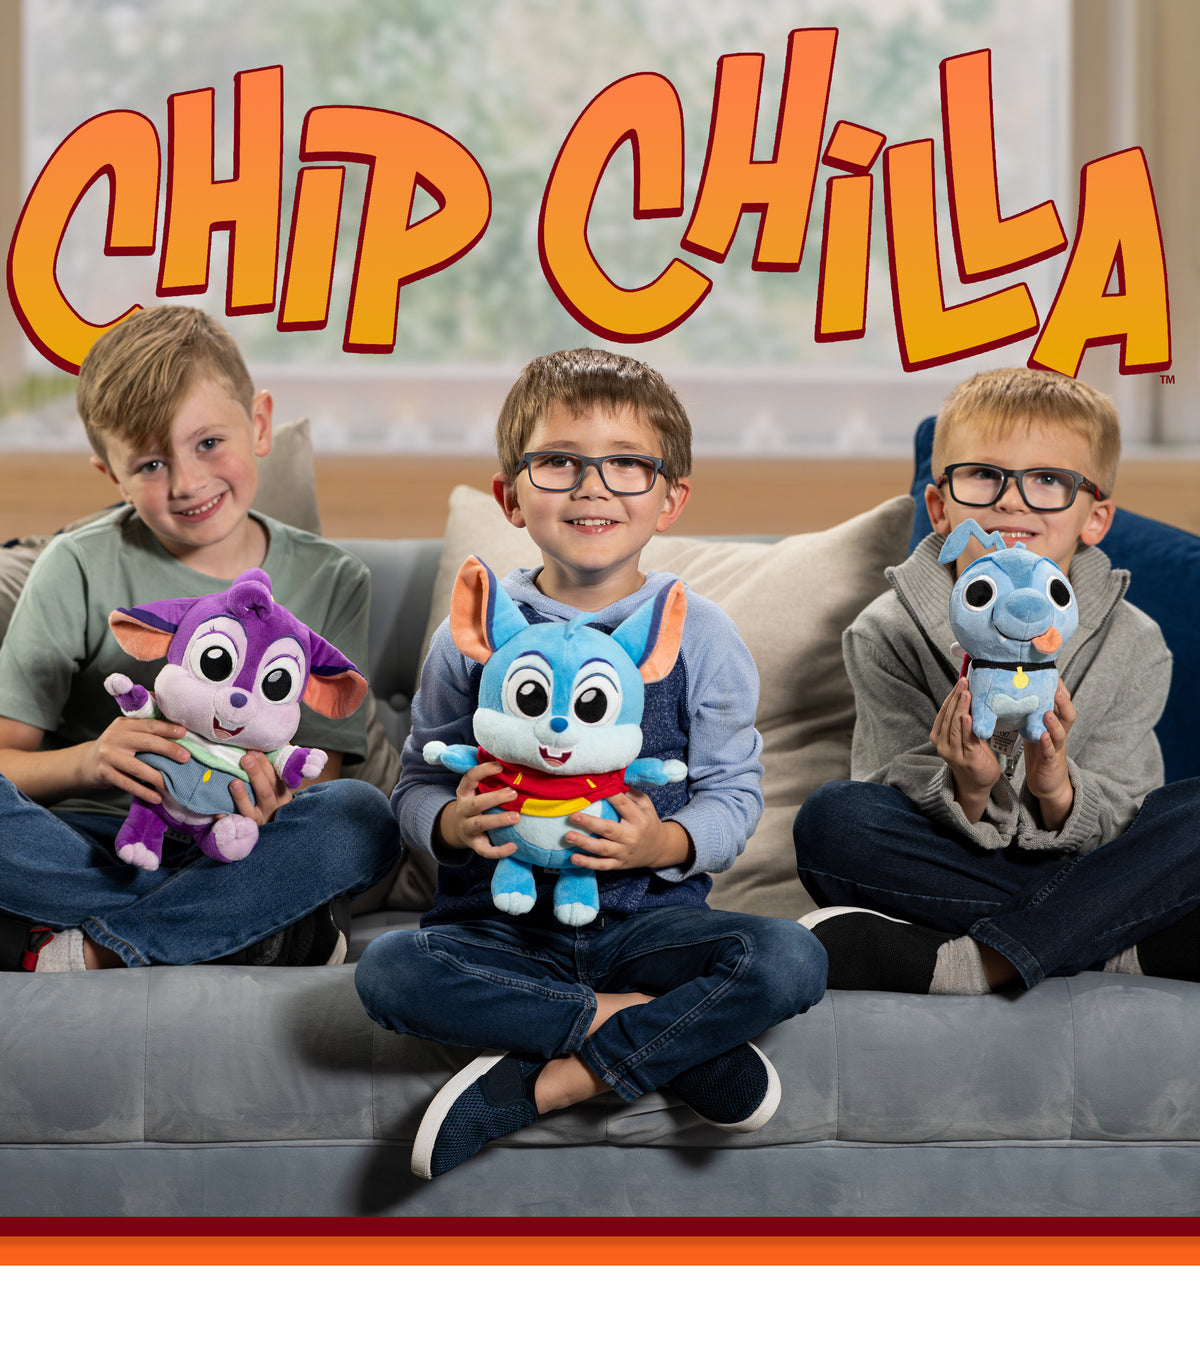 Shop the Chip Chilla™ Collection